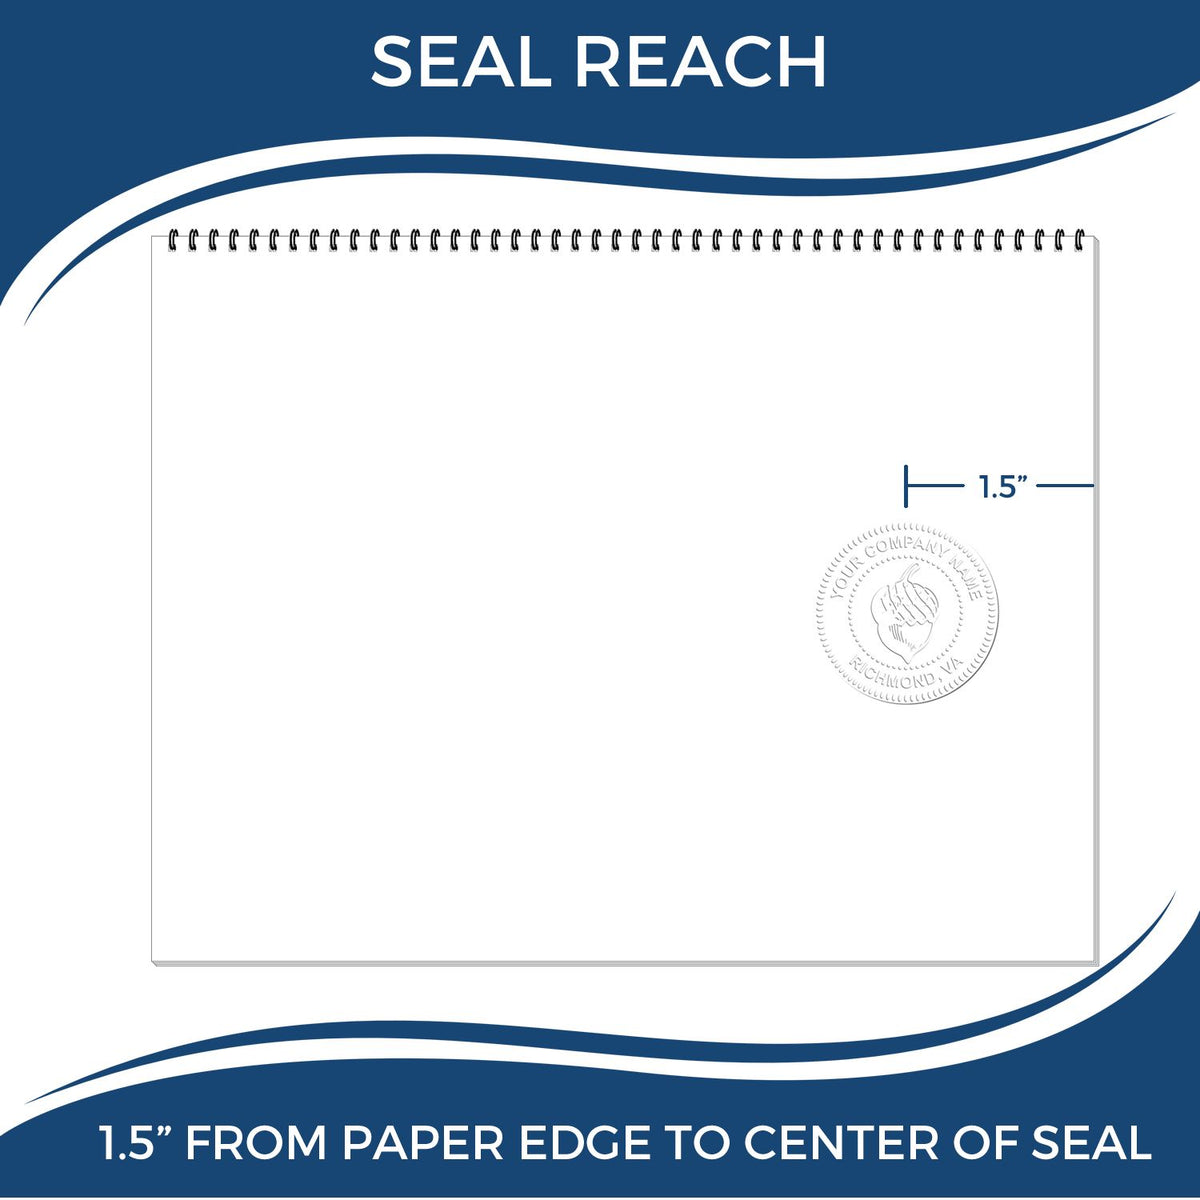 An infographic showing the seal reach which is represented by a ruler and a miniature seal image of the Handheld Idaho Professional Engineer Embosser